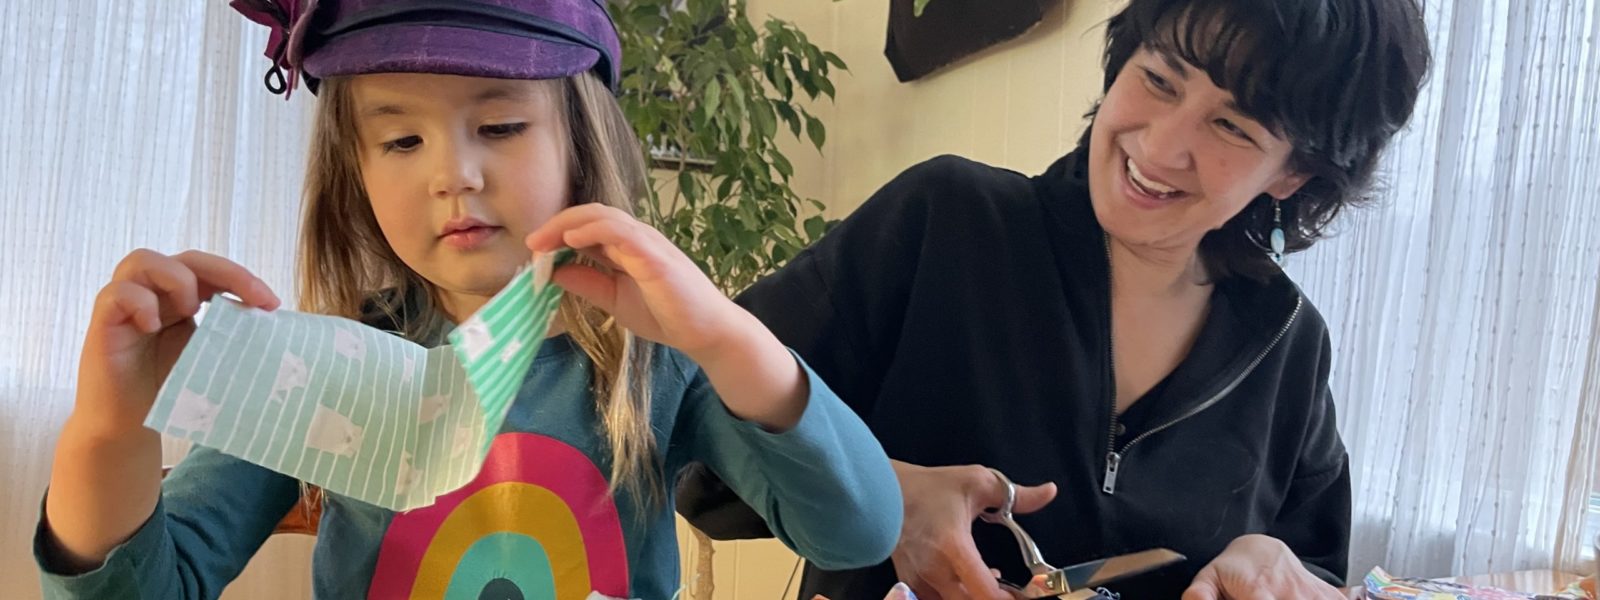 Nips and Nacks creator making cat toys with daugther